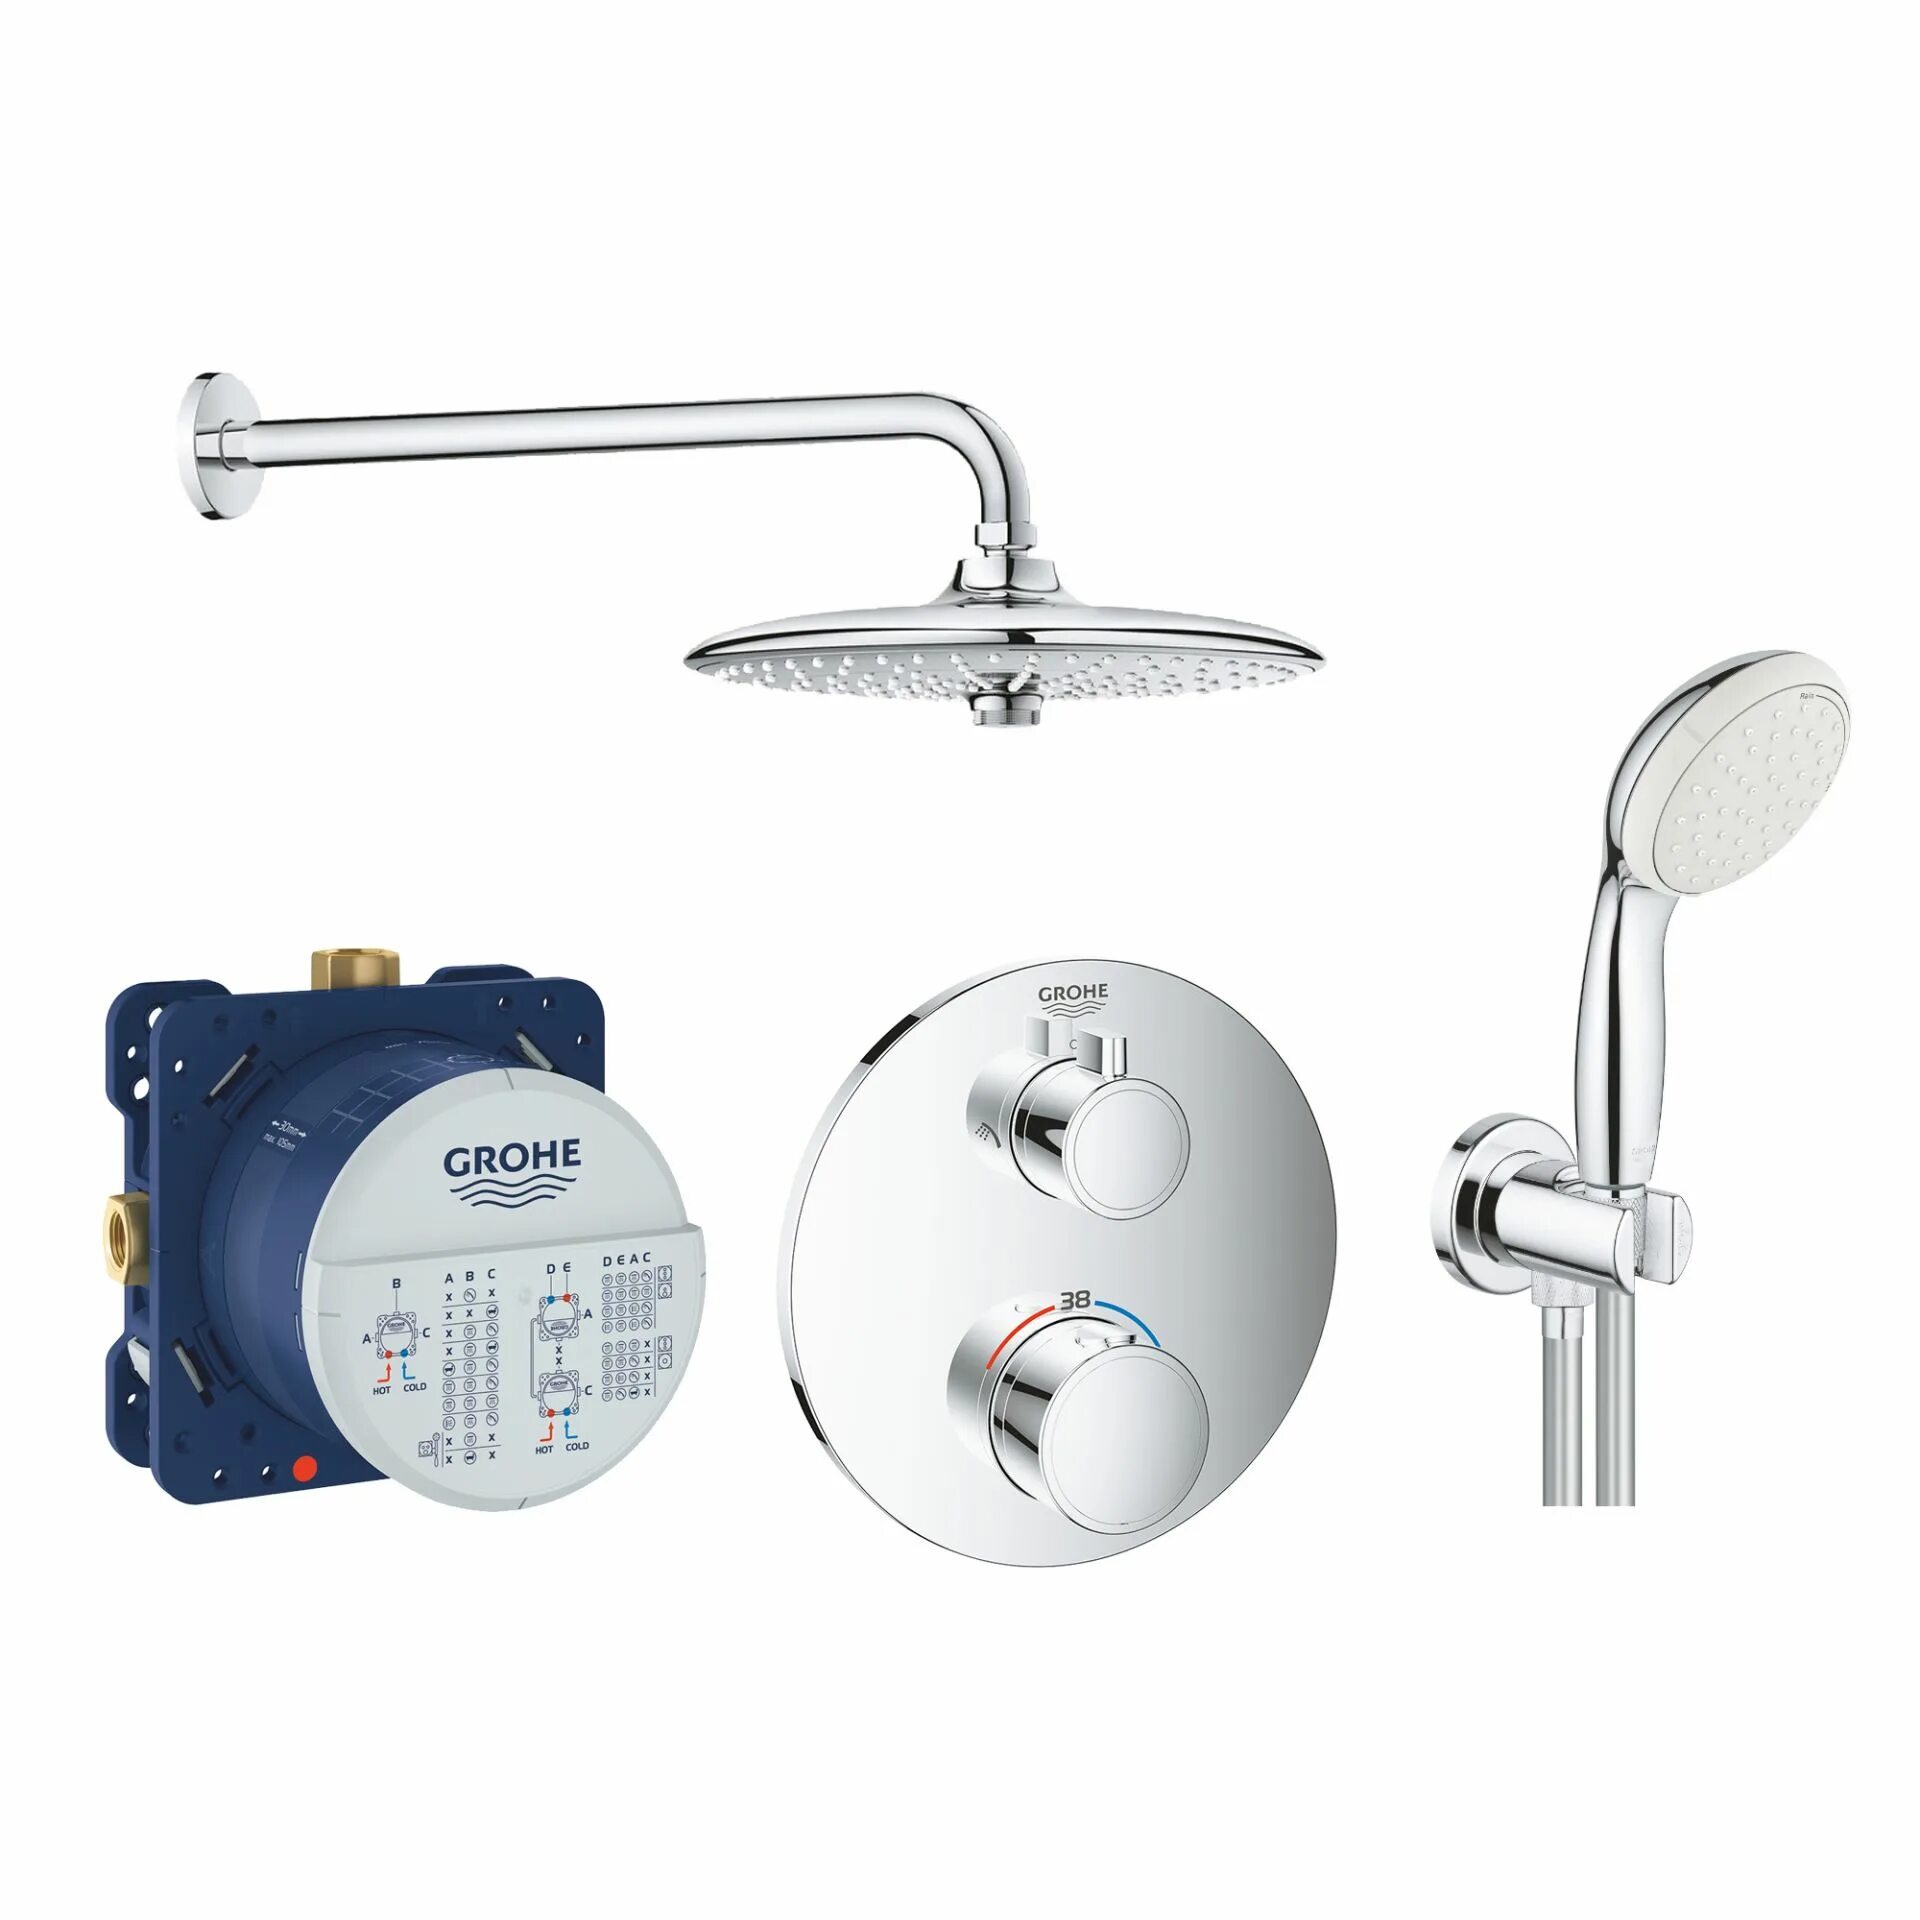 Grohe Grohtherm SMARTCONTROL 29121000. 26483000 Grohe. Grohe Grohtherm SMARTCONTROL. Смеситель Grohe SMARTCONTROL. Душа скрытого grohe